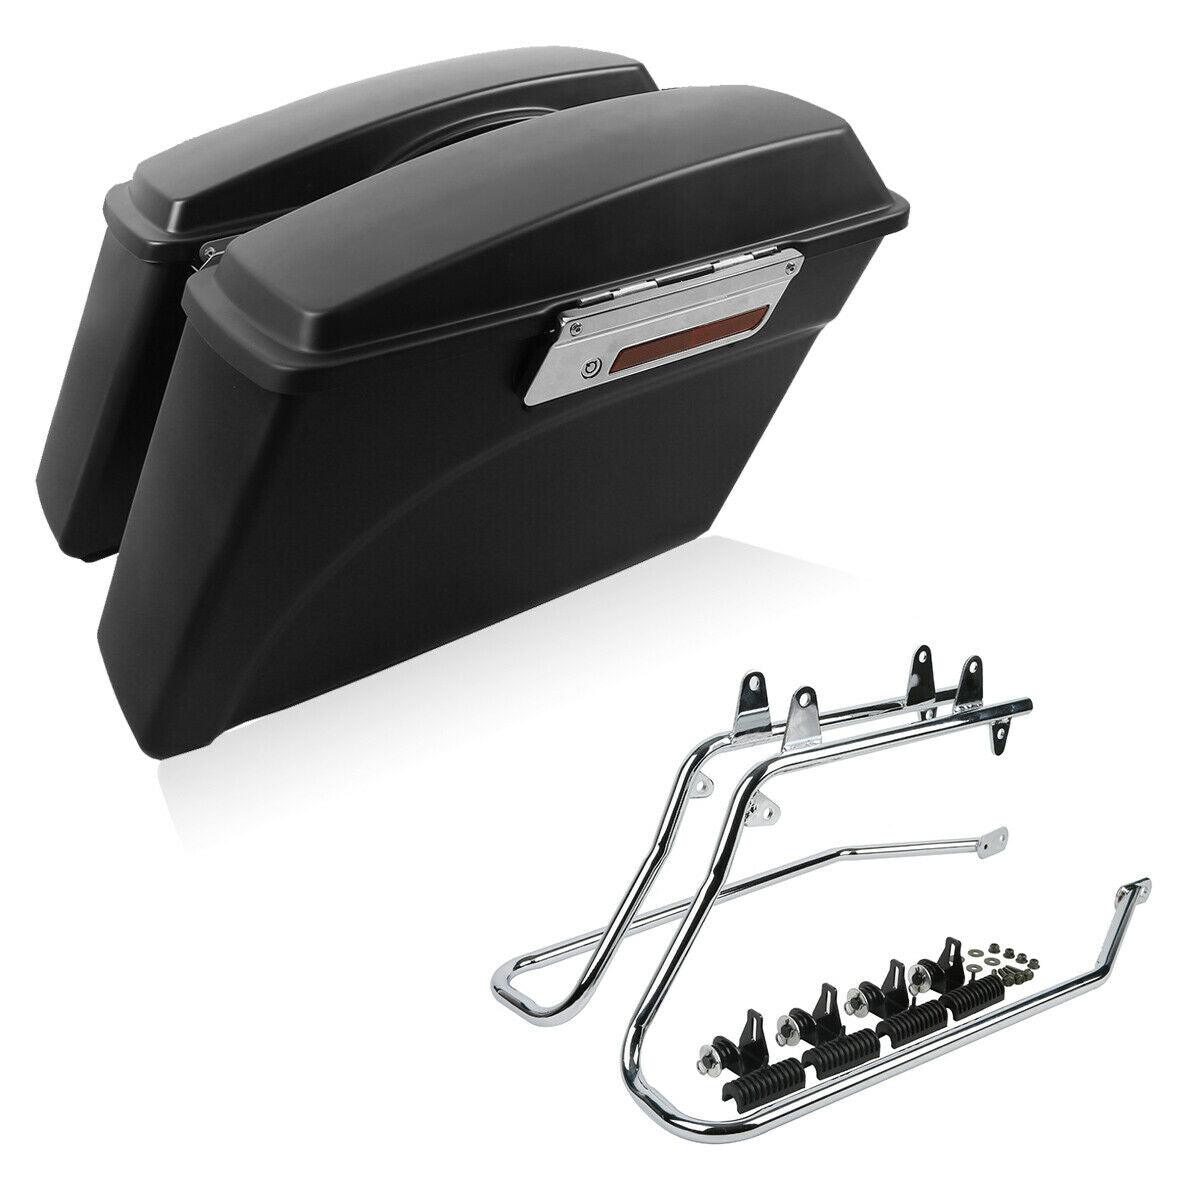 Hard Saddlebags Conversion Bracket Fit for Harley Softail Fatboy 1984-2017 2016 - Moto Life Products